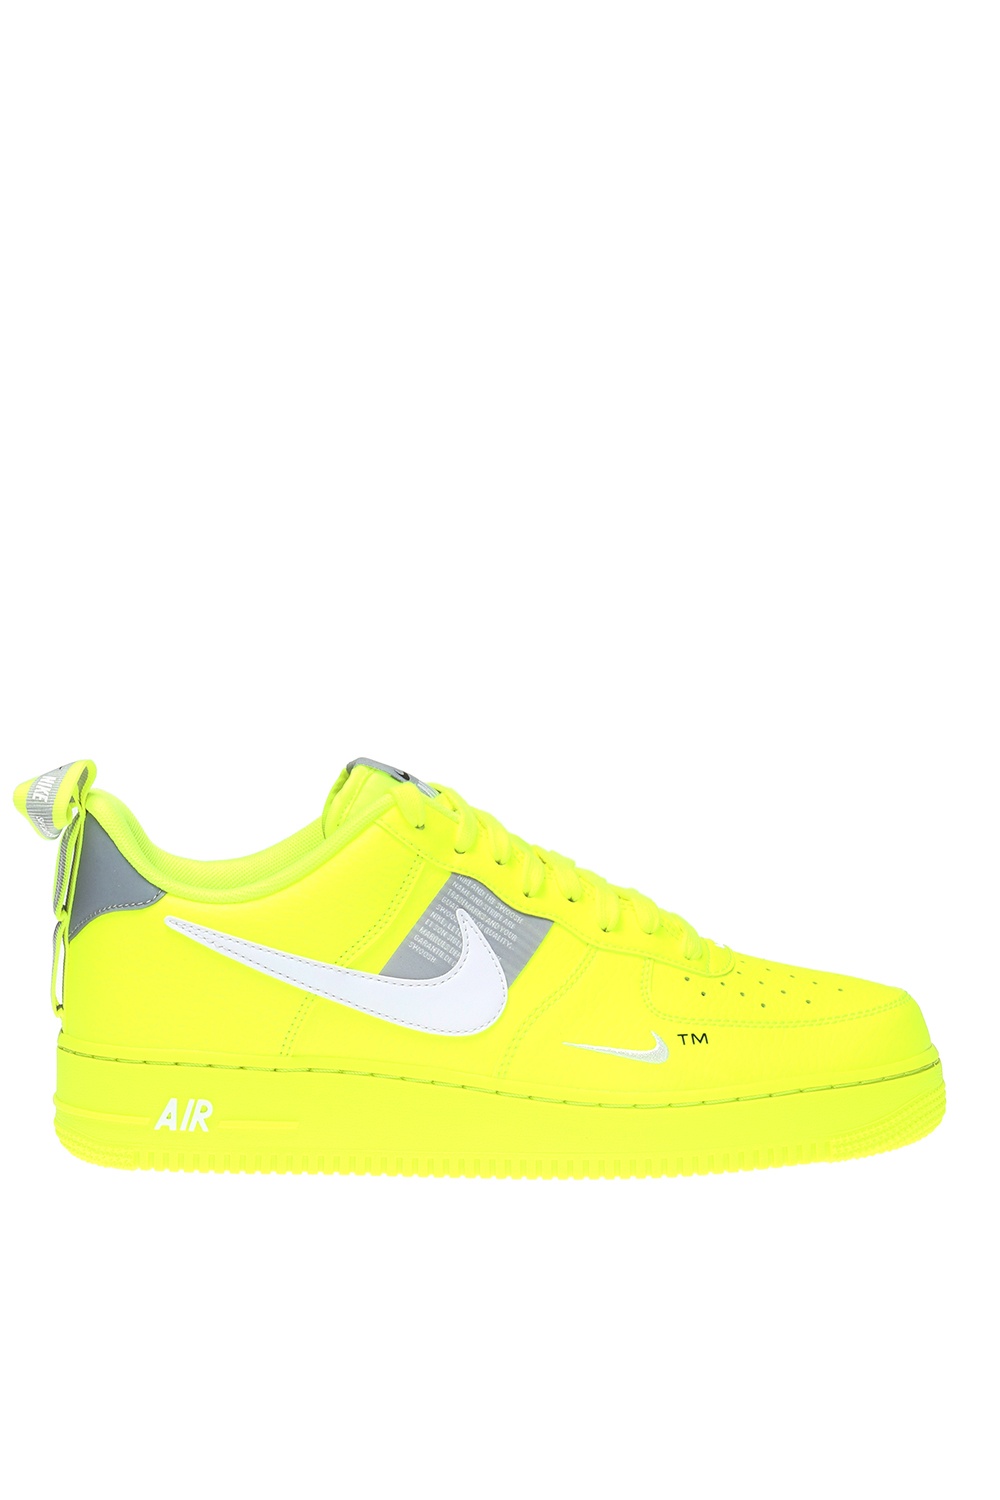 nike air force utility yellow